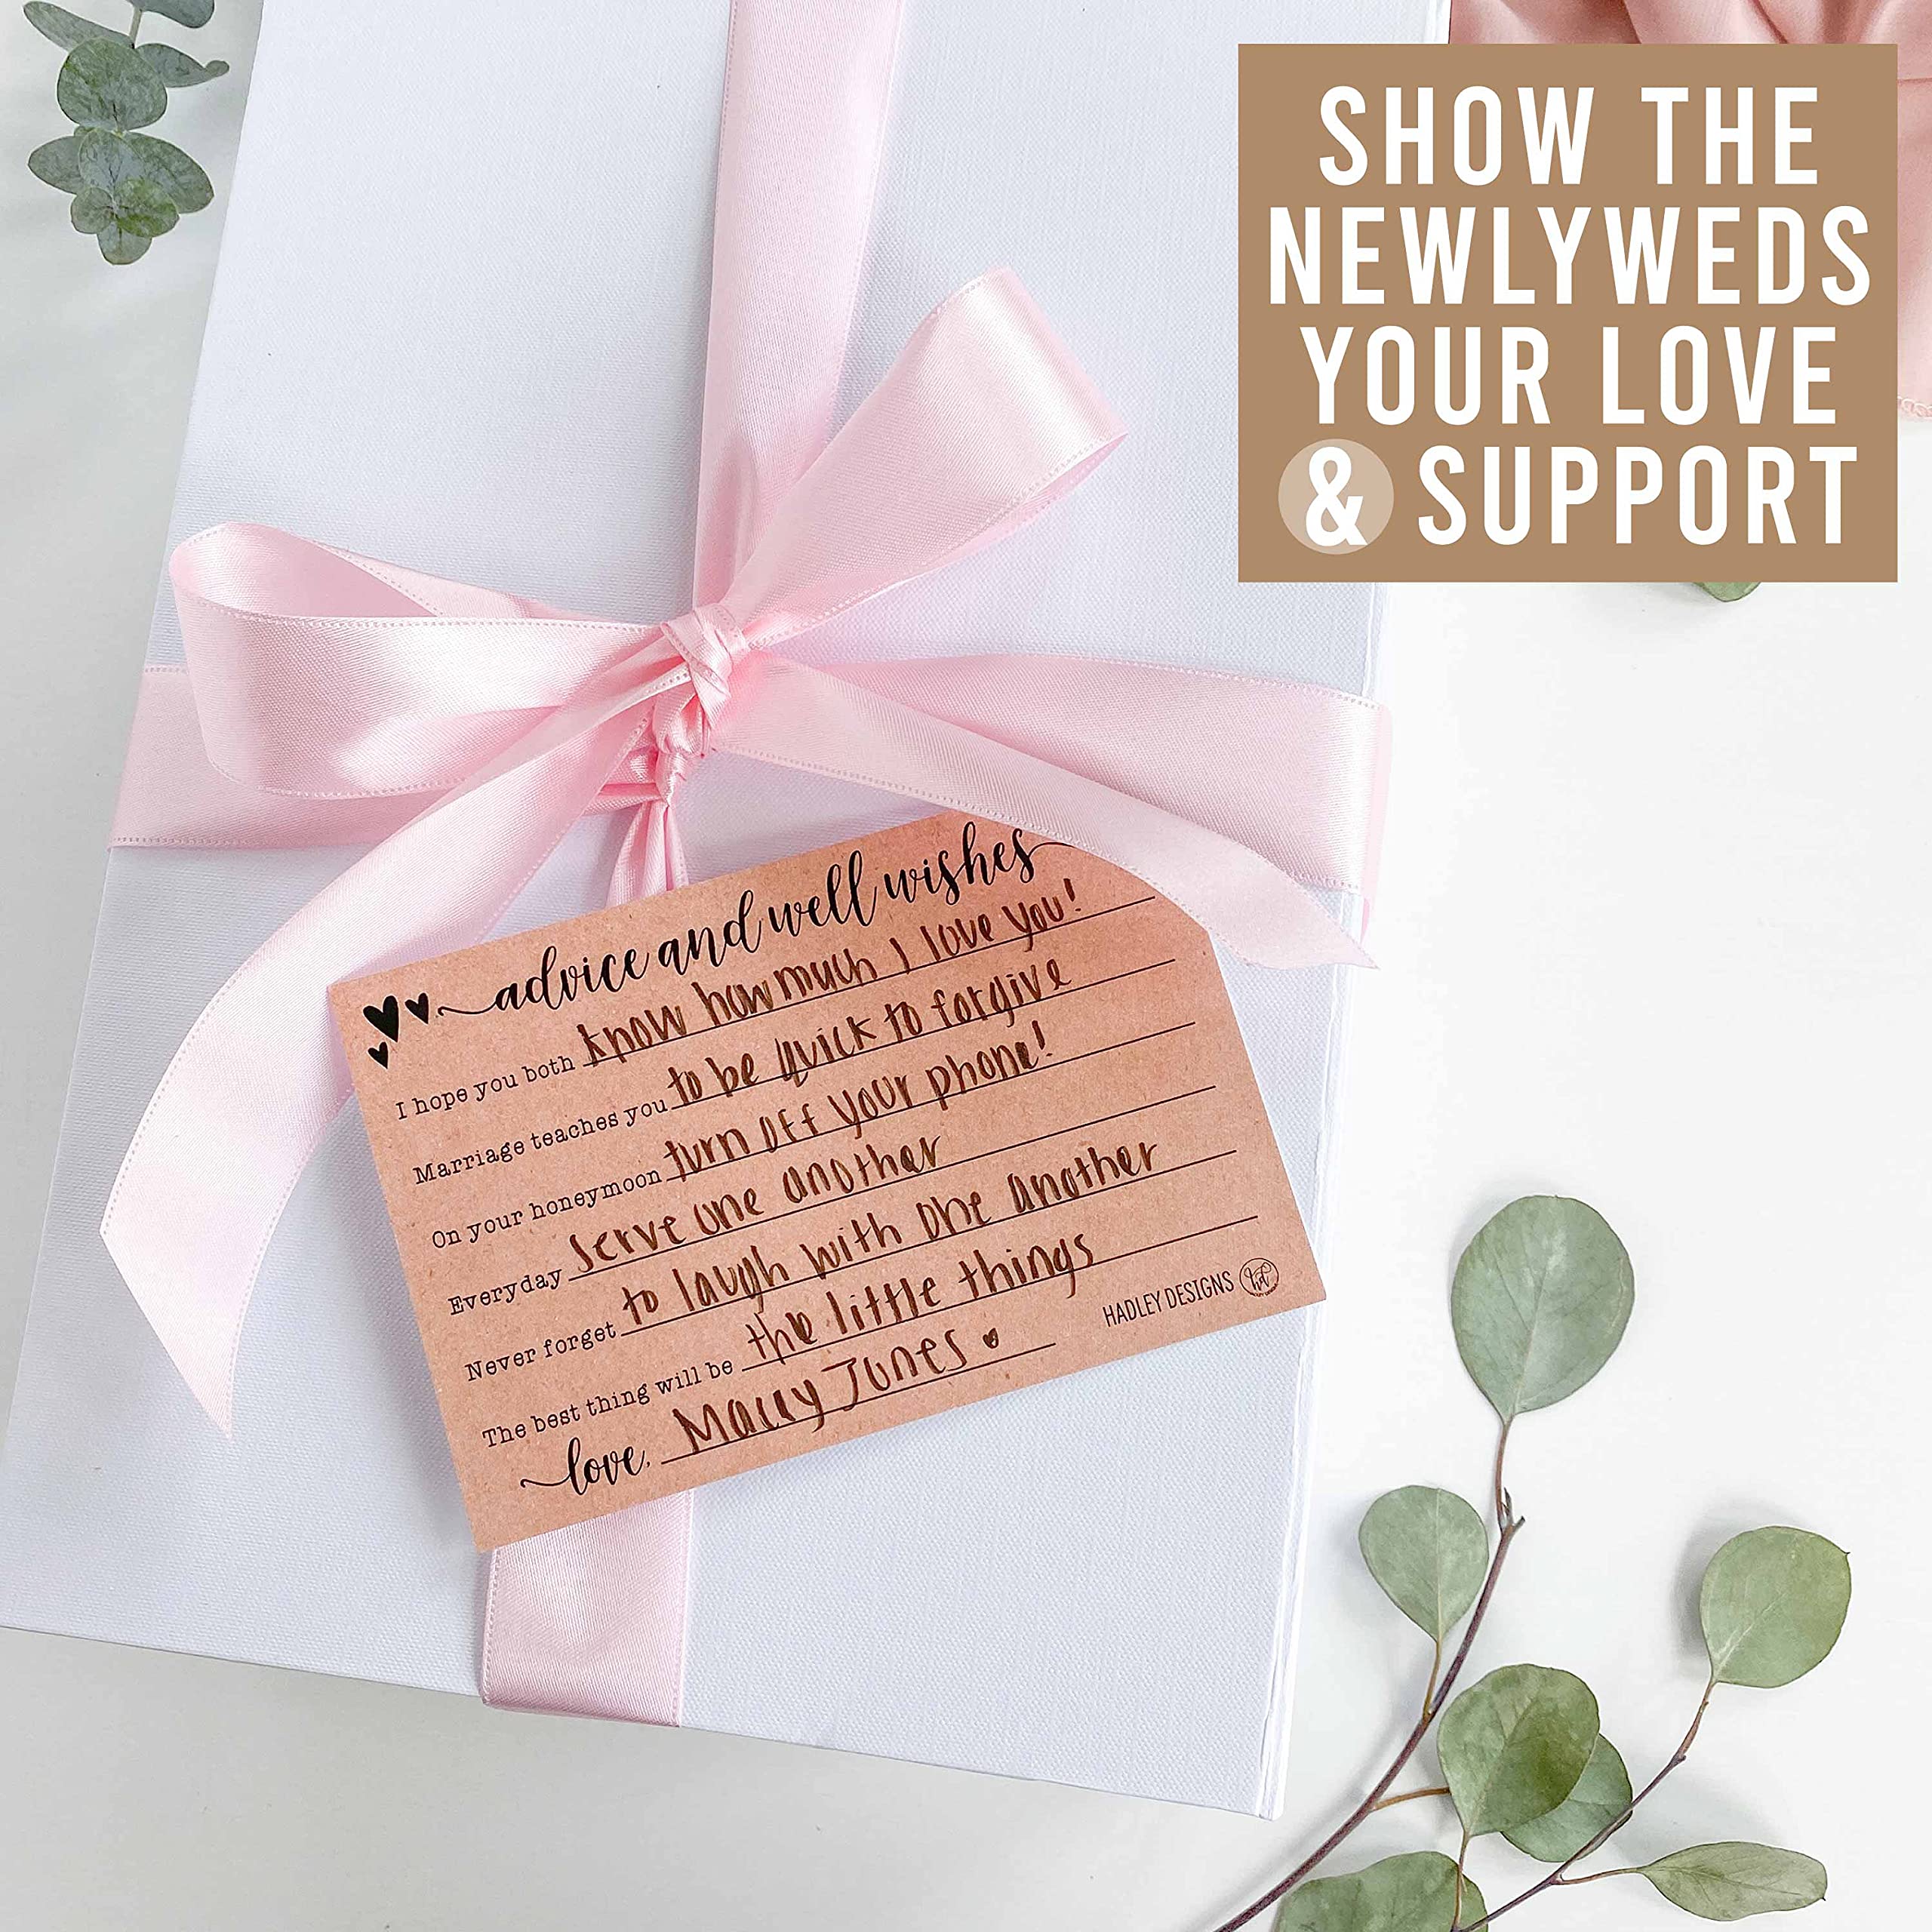 50 Wedding Advice Cards For Bride and Groom, Wedding Card Boxes For Reception, Wedding Guest Book Alternative, Rustic Bridal Shower Games For Guests Wedding Games For Guests Advice For The Bride Cards